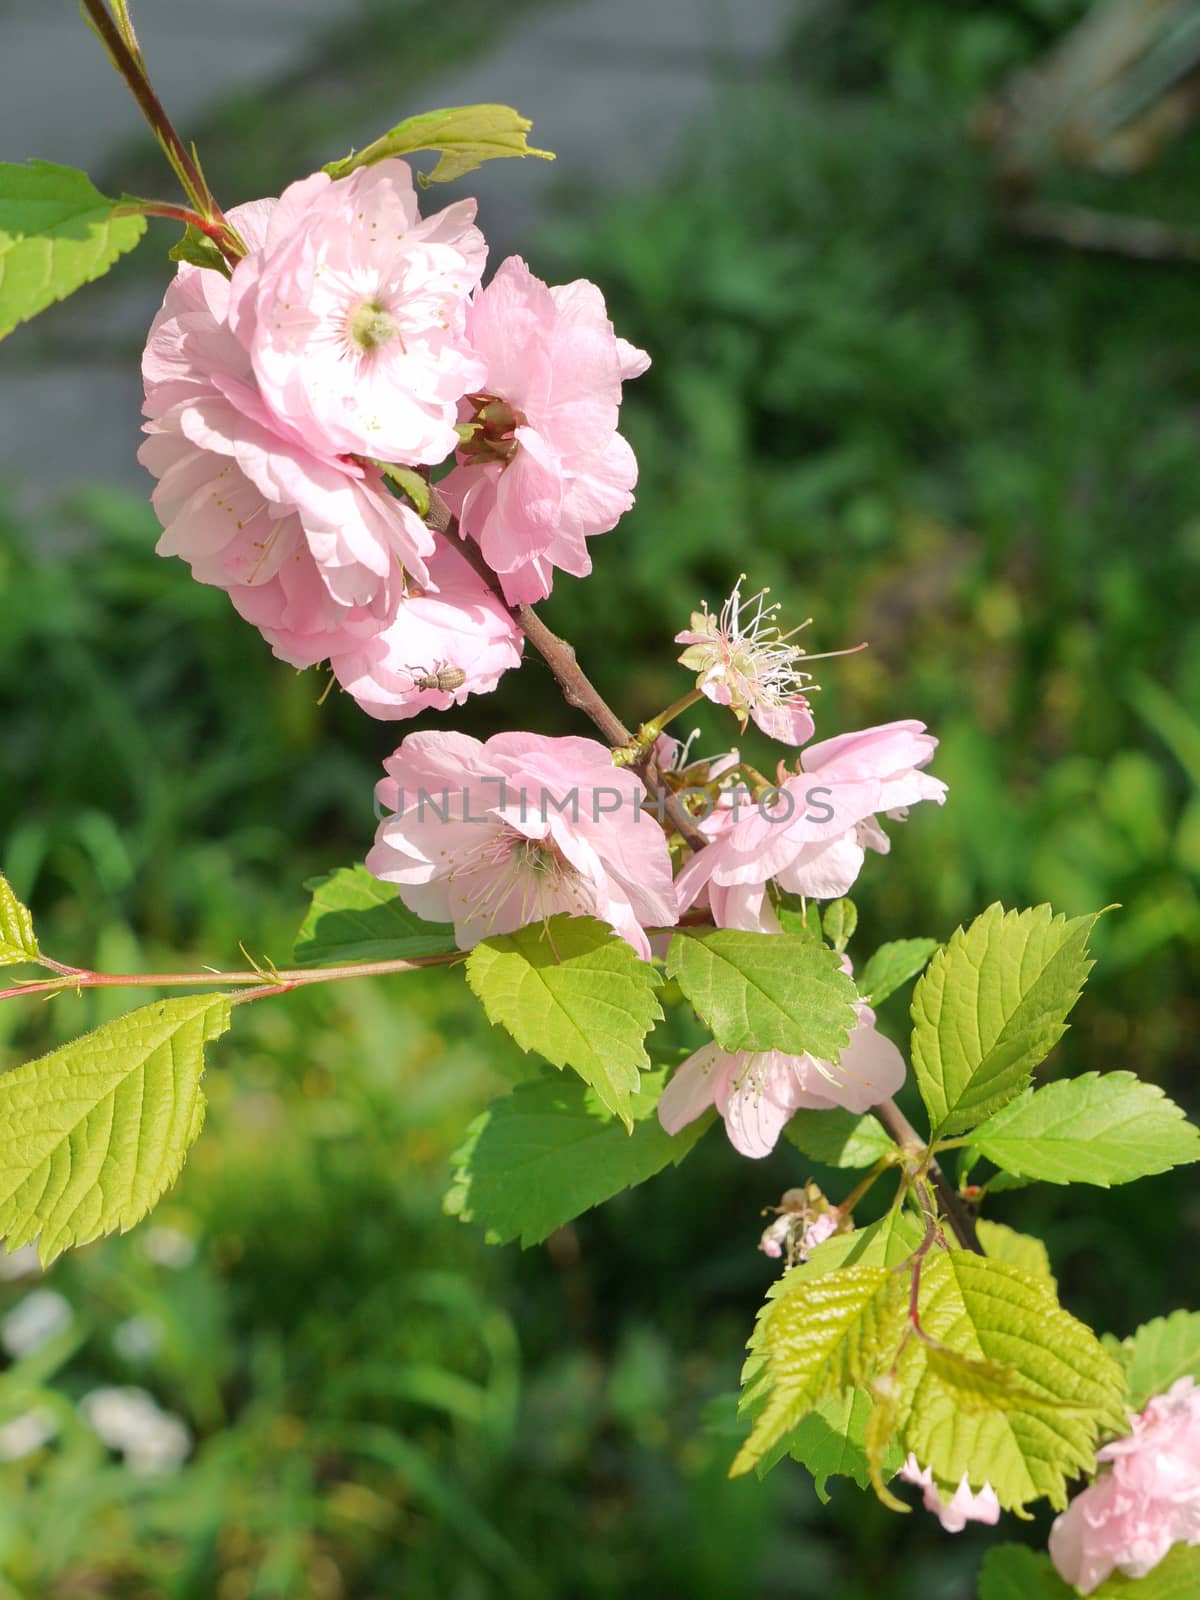 A branch with pink lush flowers and ornamental green leaves, shot close-up by Adamchuk